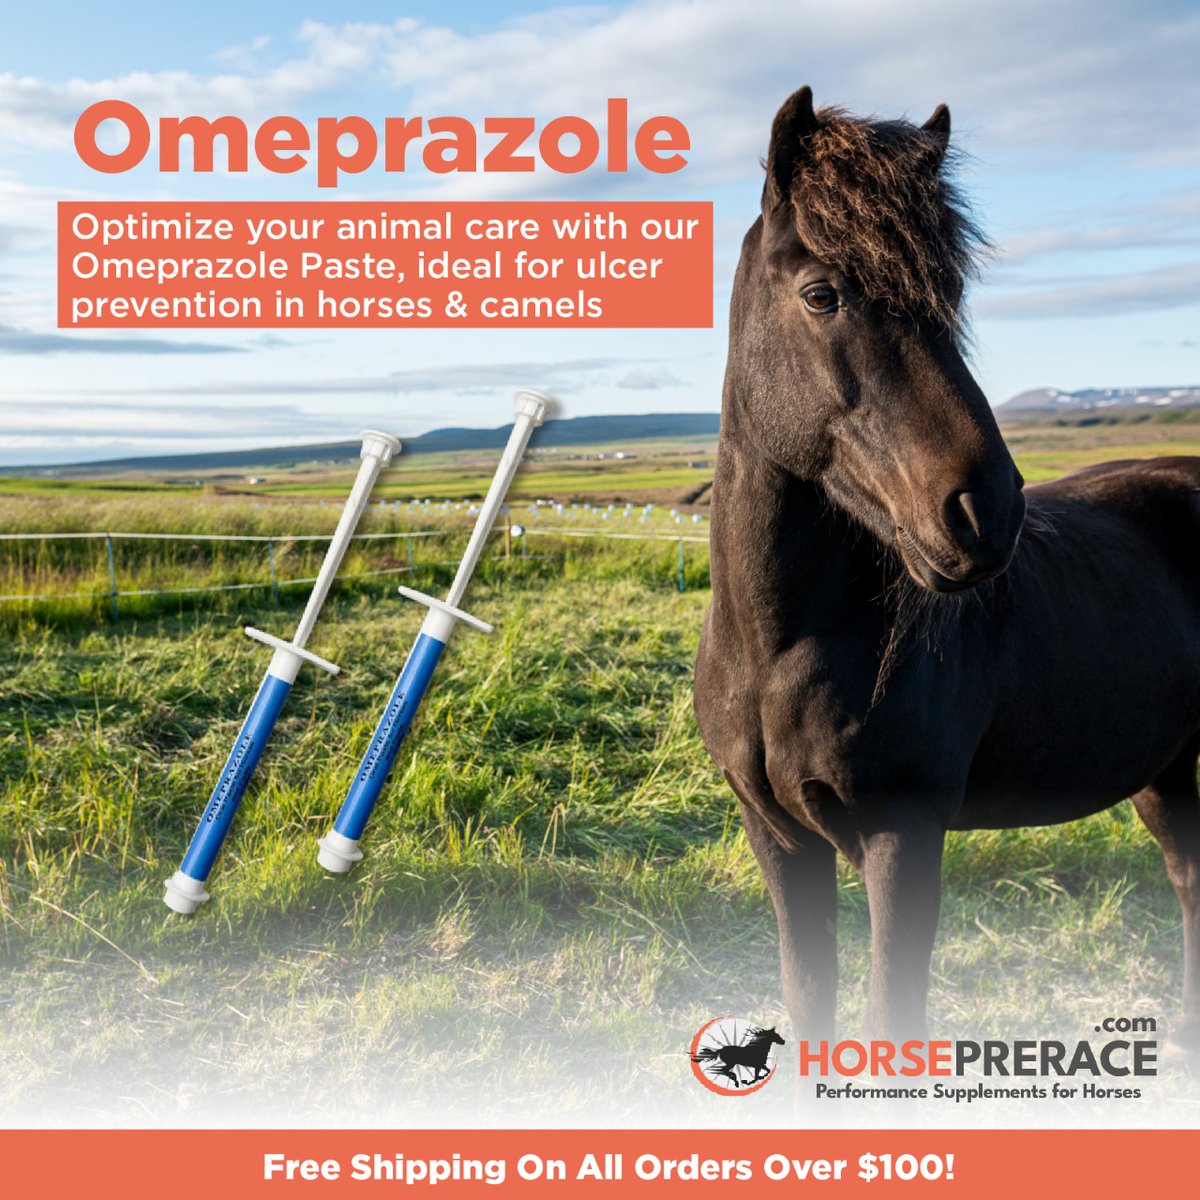 🌟 Keep Your Horses, Greyhounds, and Camels Healthy with Omeprazole Paste! 🌟

Prioritize their health today with Horse Prerace! 🌿🐾 #HorsePrerace #OmeprazolePaste #AnimalHealth #BigSale